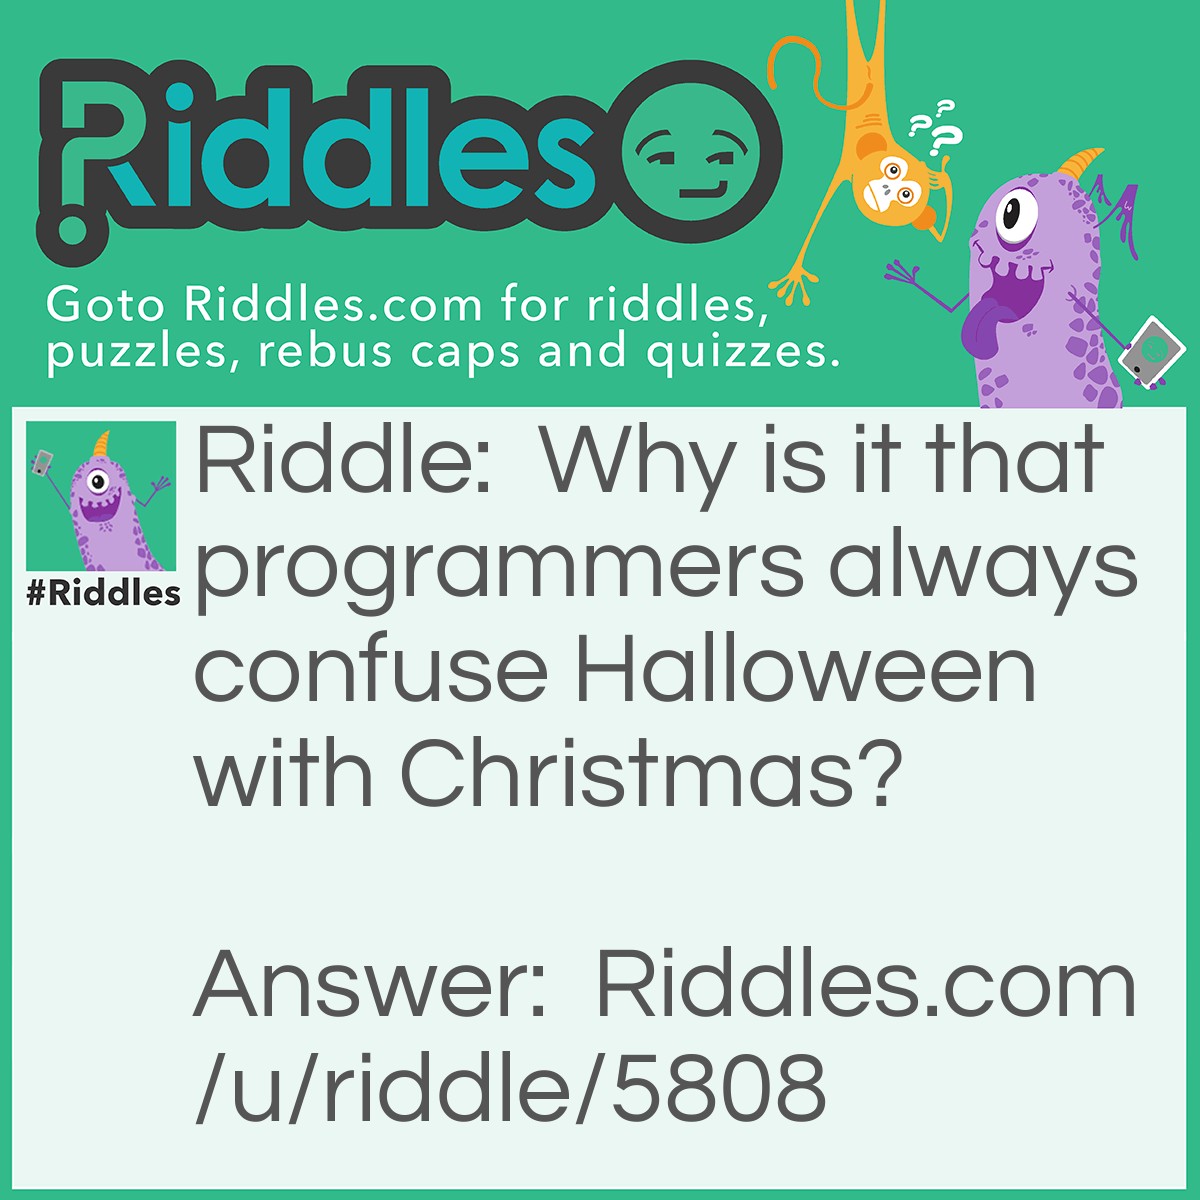 Riddle: Why is it that programmers always confuse Halloween with Christmas? Answer: Because 31 OCT = 25 DEC.